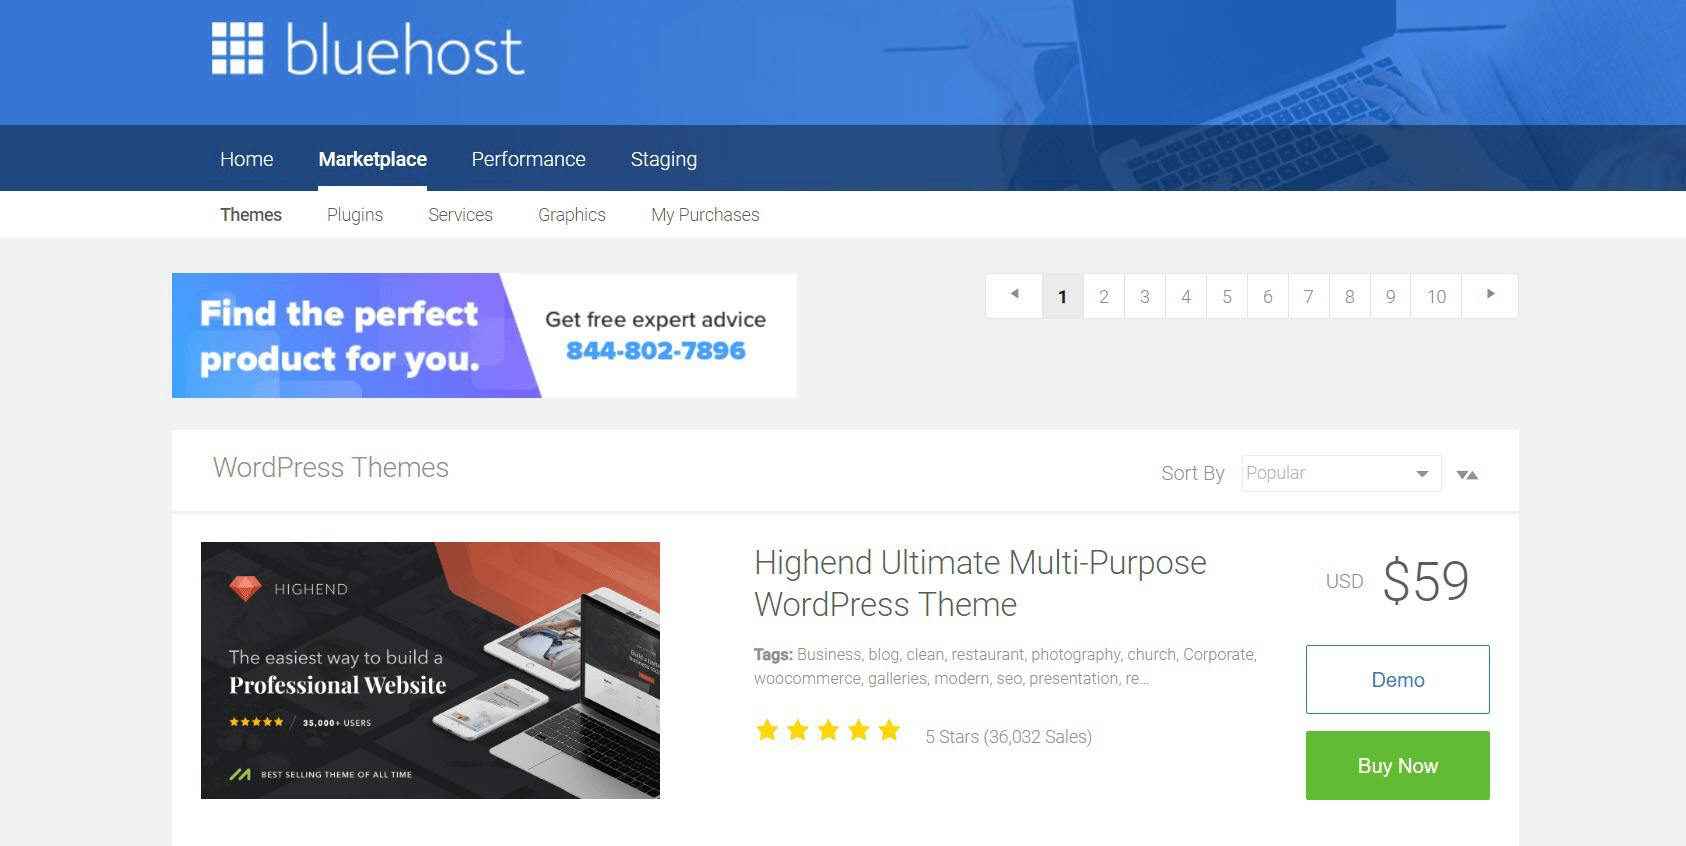 Bluehost theme marketplace in dashboard